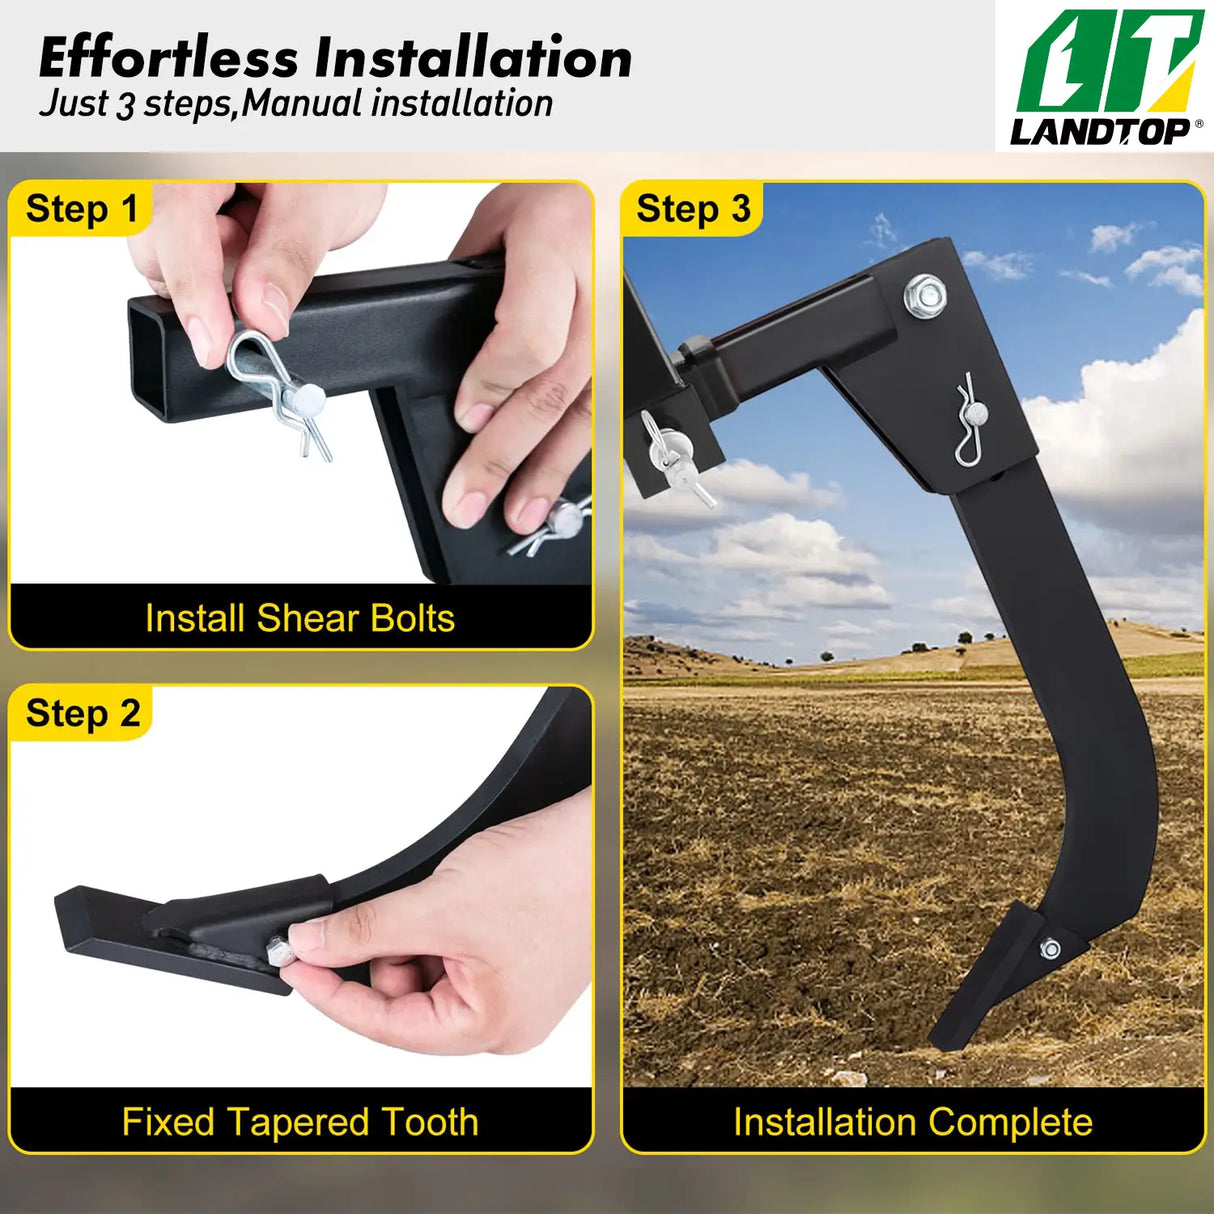 Hitch Mounted Ripper, 16" Shank Length Box Scraper Shank, 4 Hole Site Box Blade for Tractor, 2 Locating Pins Ripper Shank, 2 Plough Tips Box Blade Shank Teeth